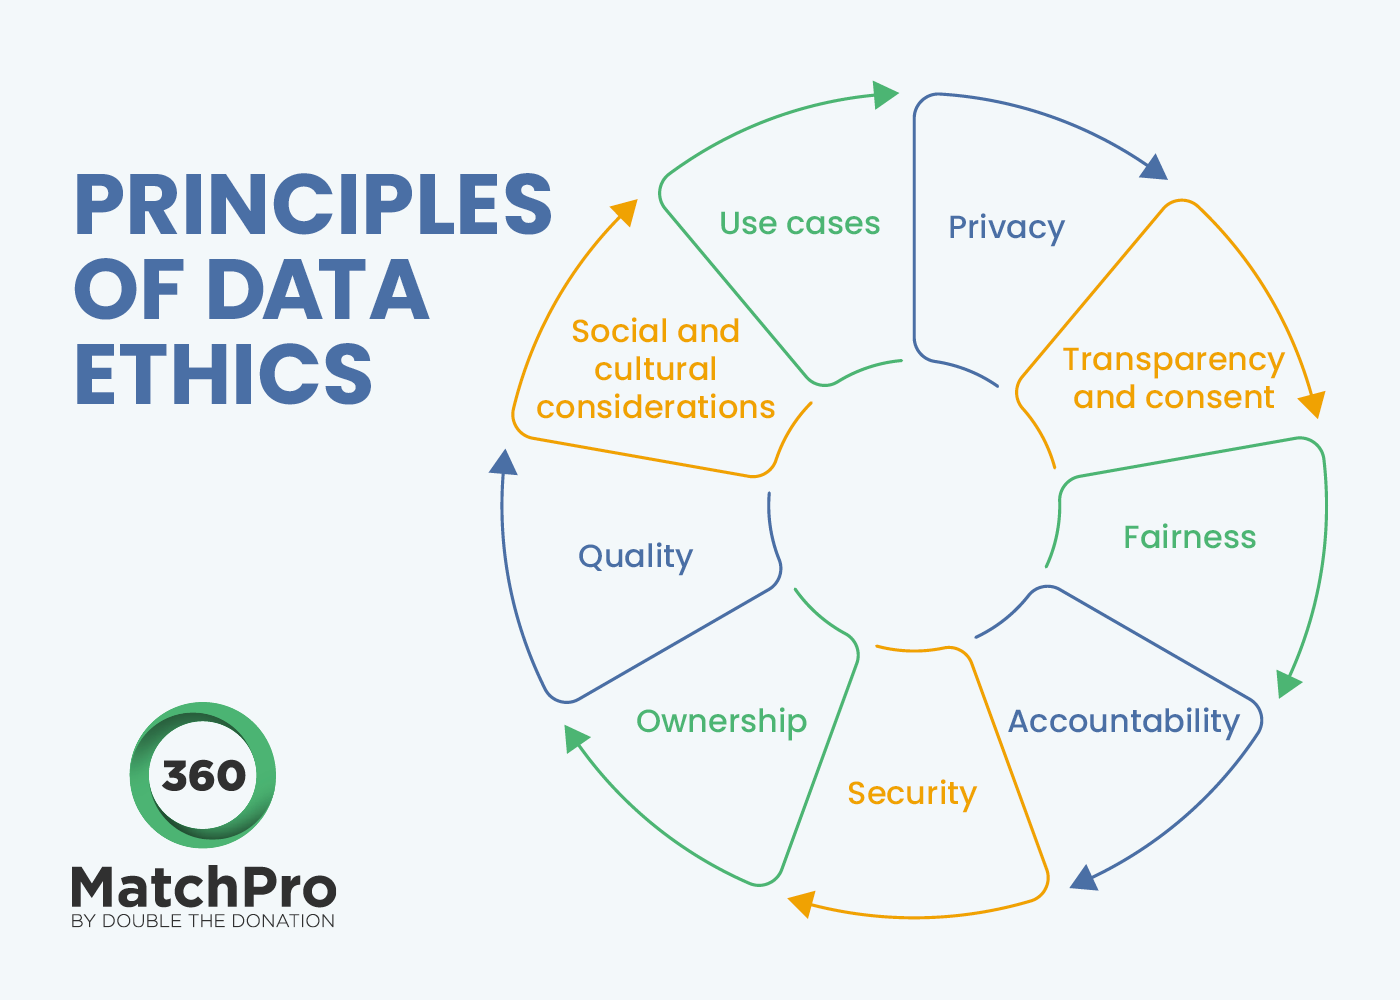 This image shows the main principles of data ethics and privacy, which are explained in the text below